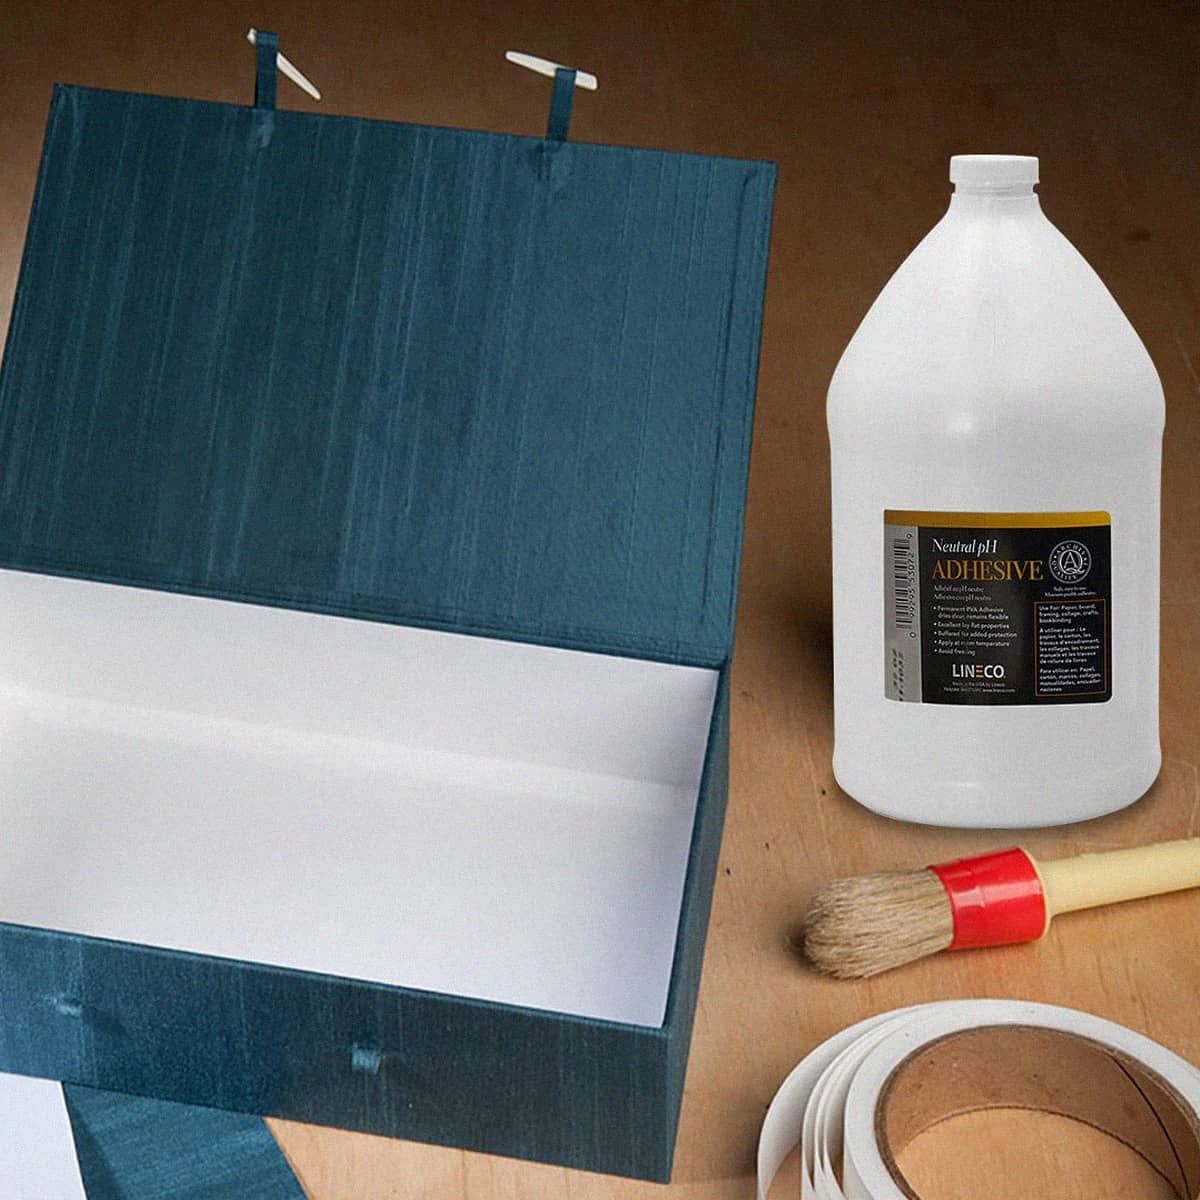  Lineco Neutral pH Adhesive, Archival Quality Acid-Free PVA  Buffered Adhesive Dries Clear Flexible, 1 Quart, Ideal for Paper Board  Framing Collage Crafts Bookbinding : Arts, Crafts & Sewing